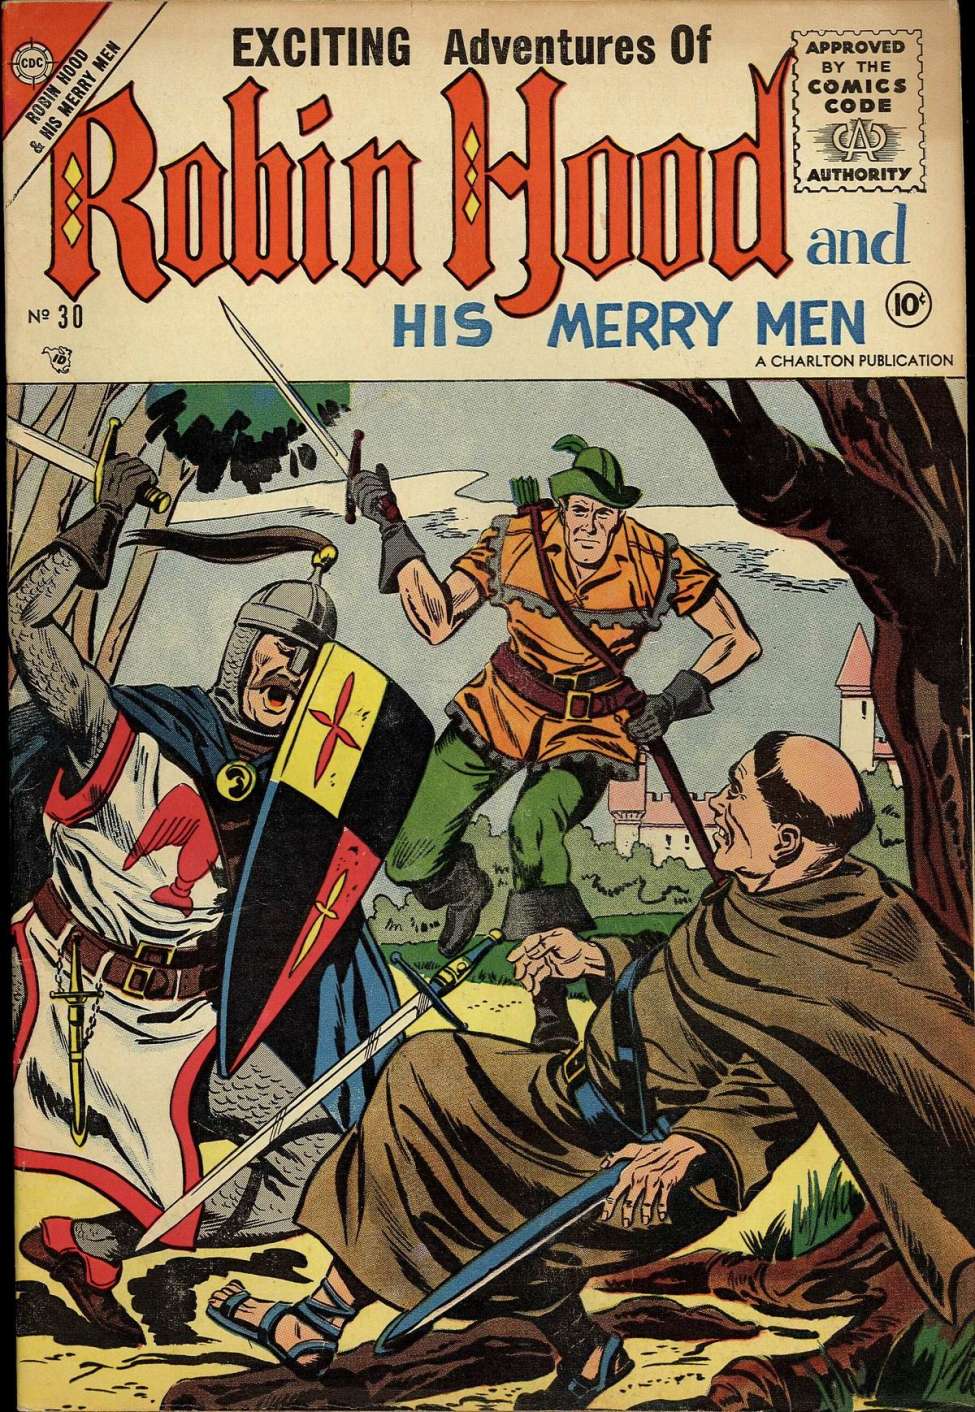 Comic Book Cover For Robin Hood and His Merry Men 30 (alt) - Version 2